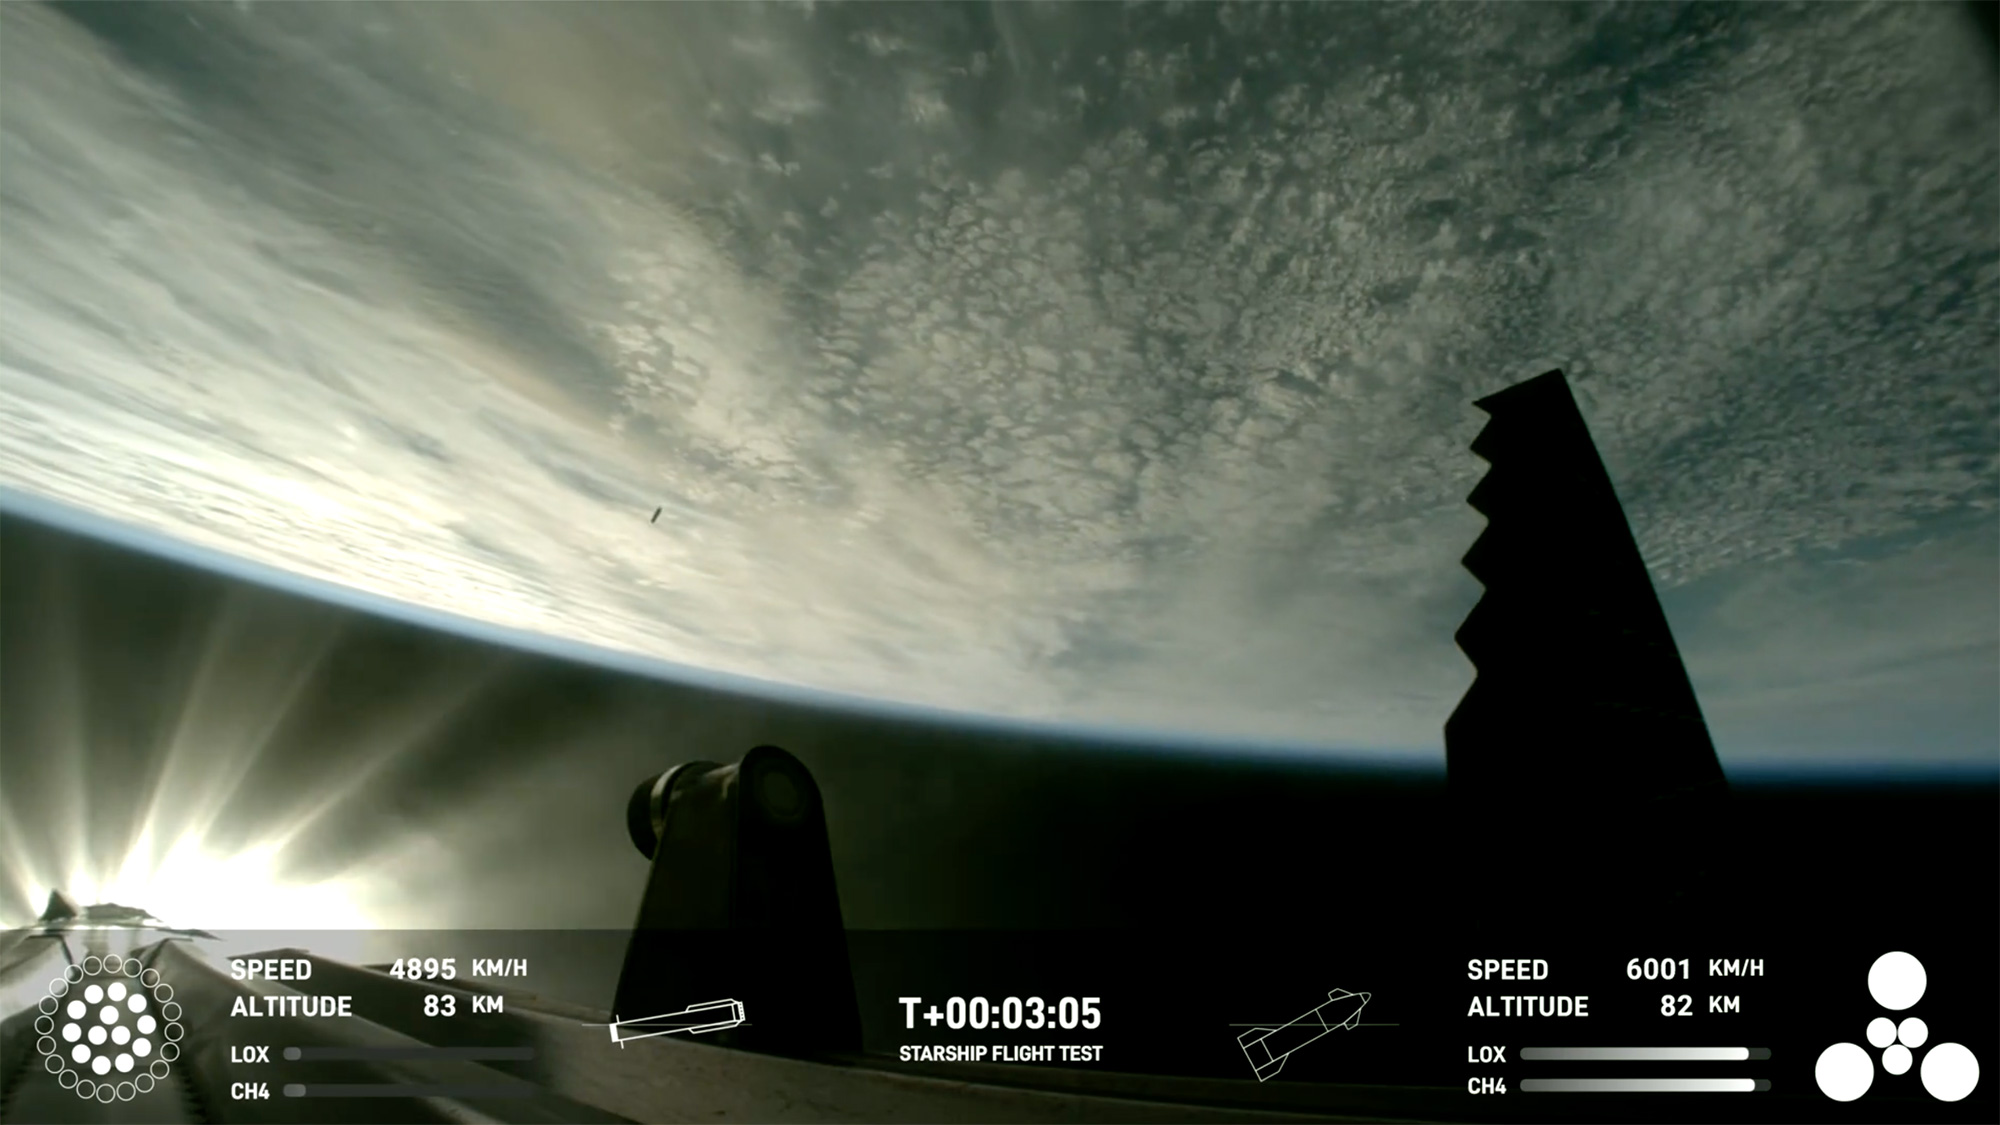 A screenshot from the SpaceX livestream shows Starship after separating from the Super Heavy booster on March 14.